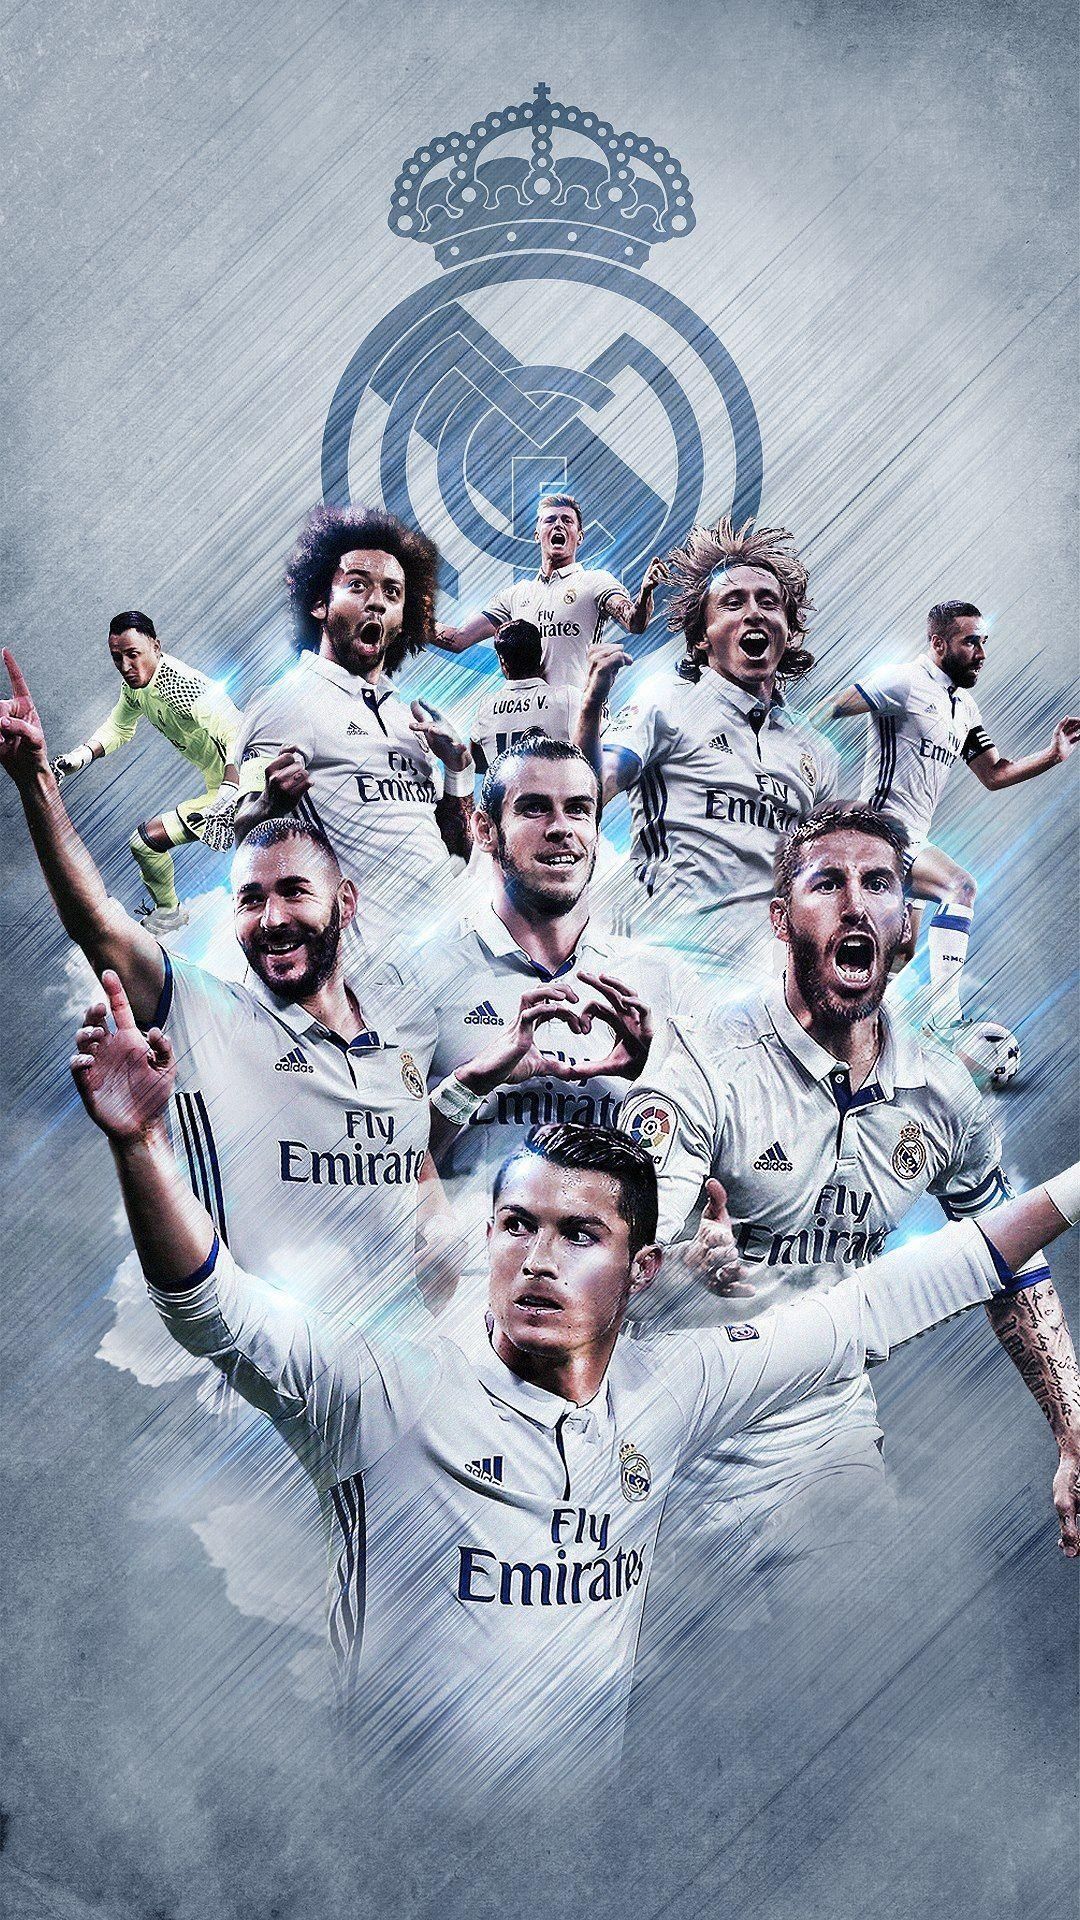 ✓[160+] Fresh Emilio Sansolini Real Madrid Wallpaper. Great Foofball Club -  Android / iPhone HD Wallpaper Background Download (png / jpg) (2023)